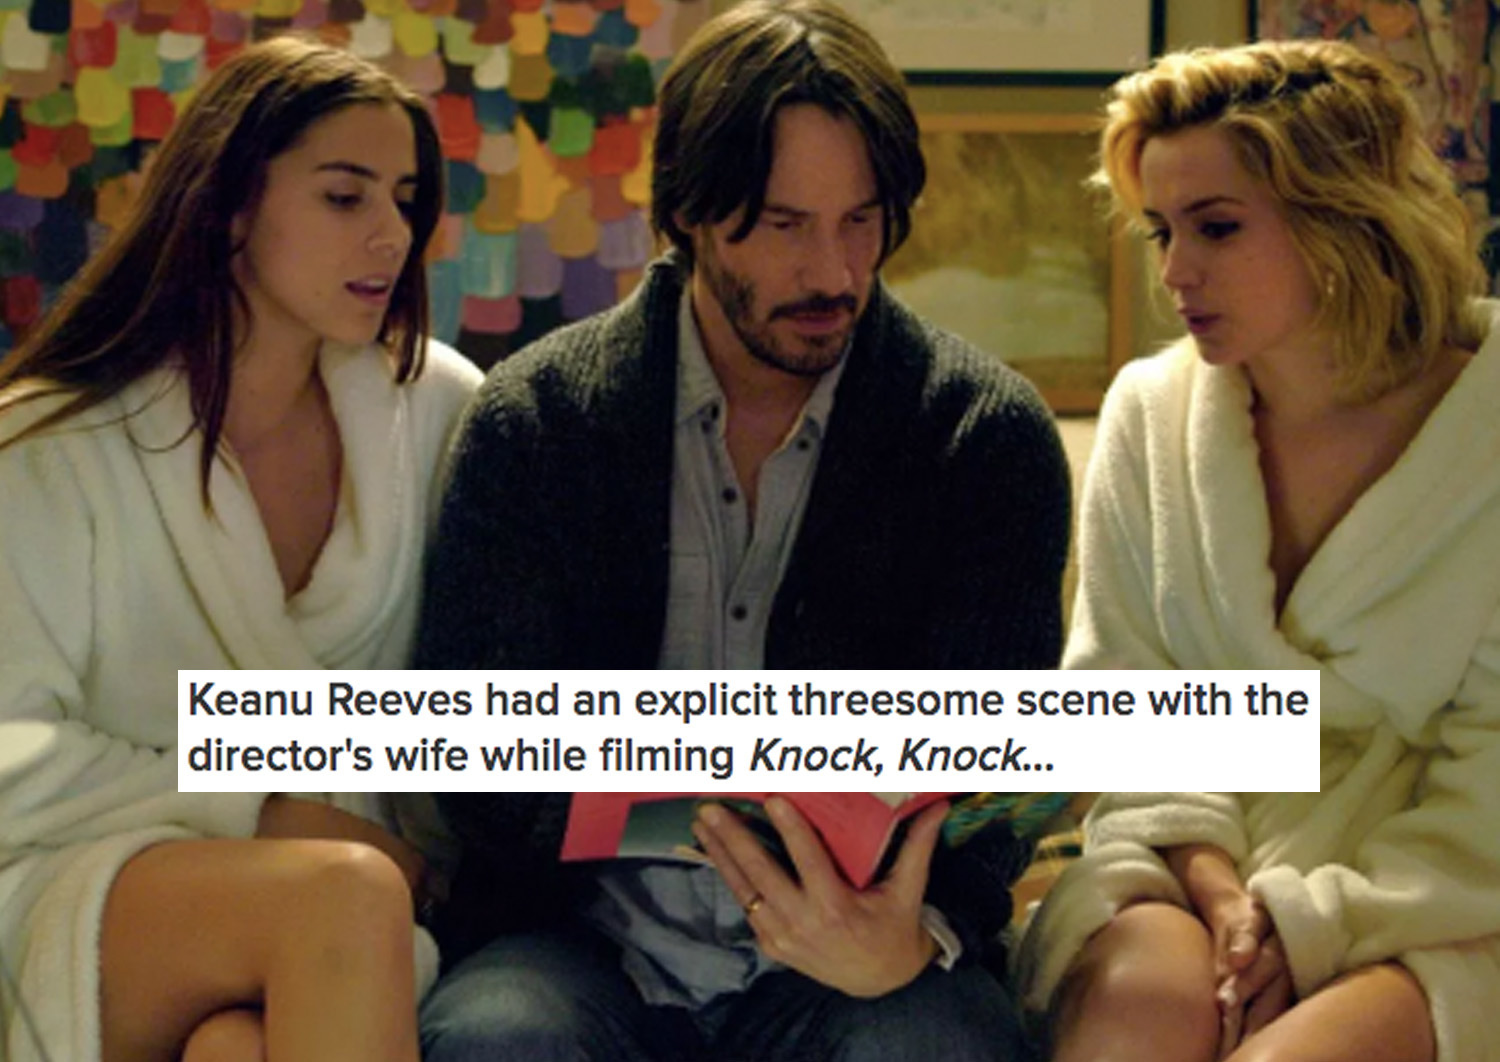 13 Incredibly Awkward Behind-The-Scenes Stories About Movie Sex Scenes Thatll Change The Way You Watch Them